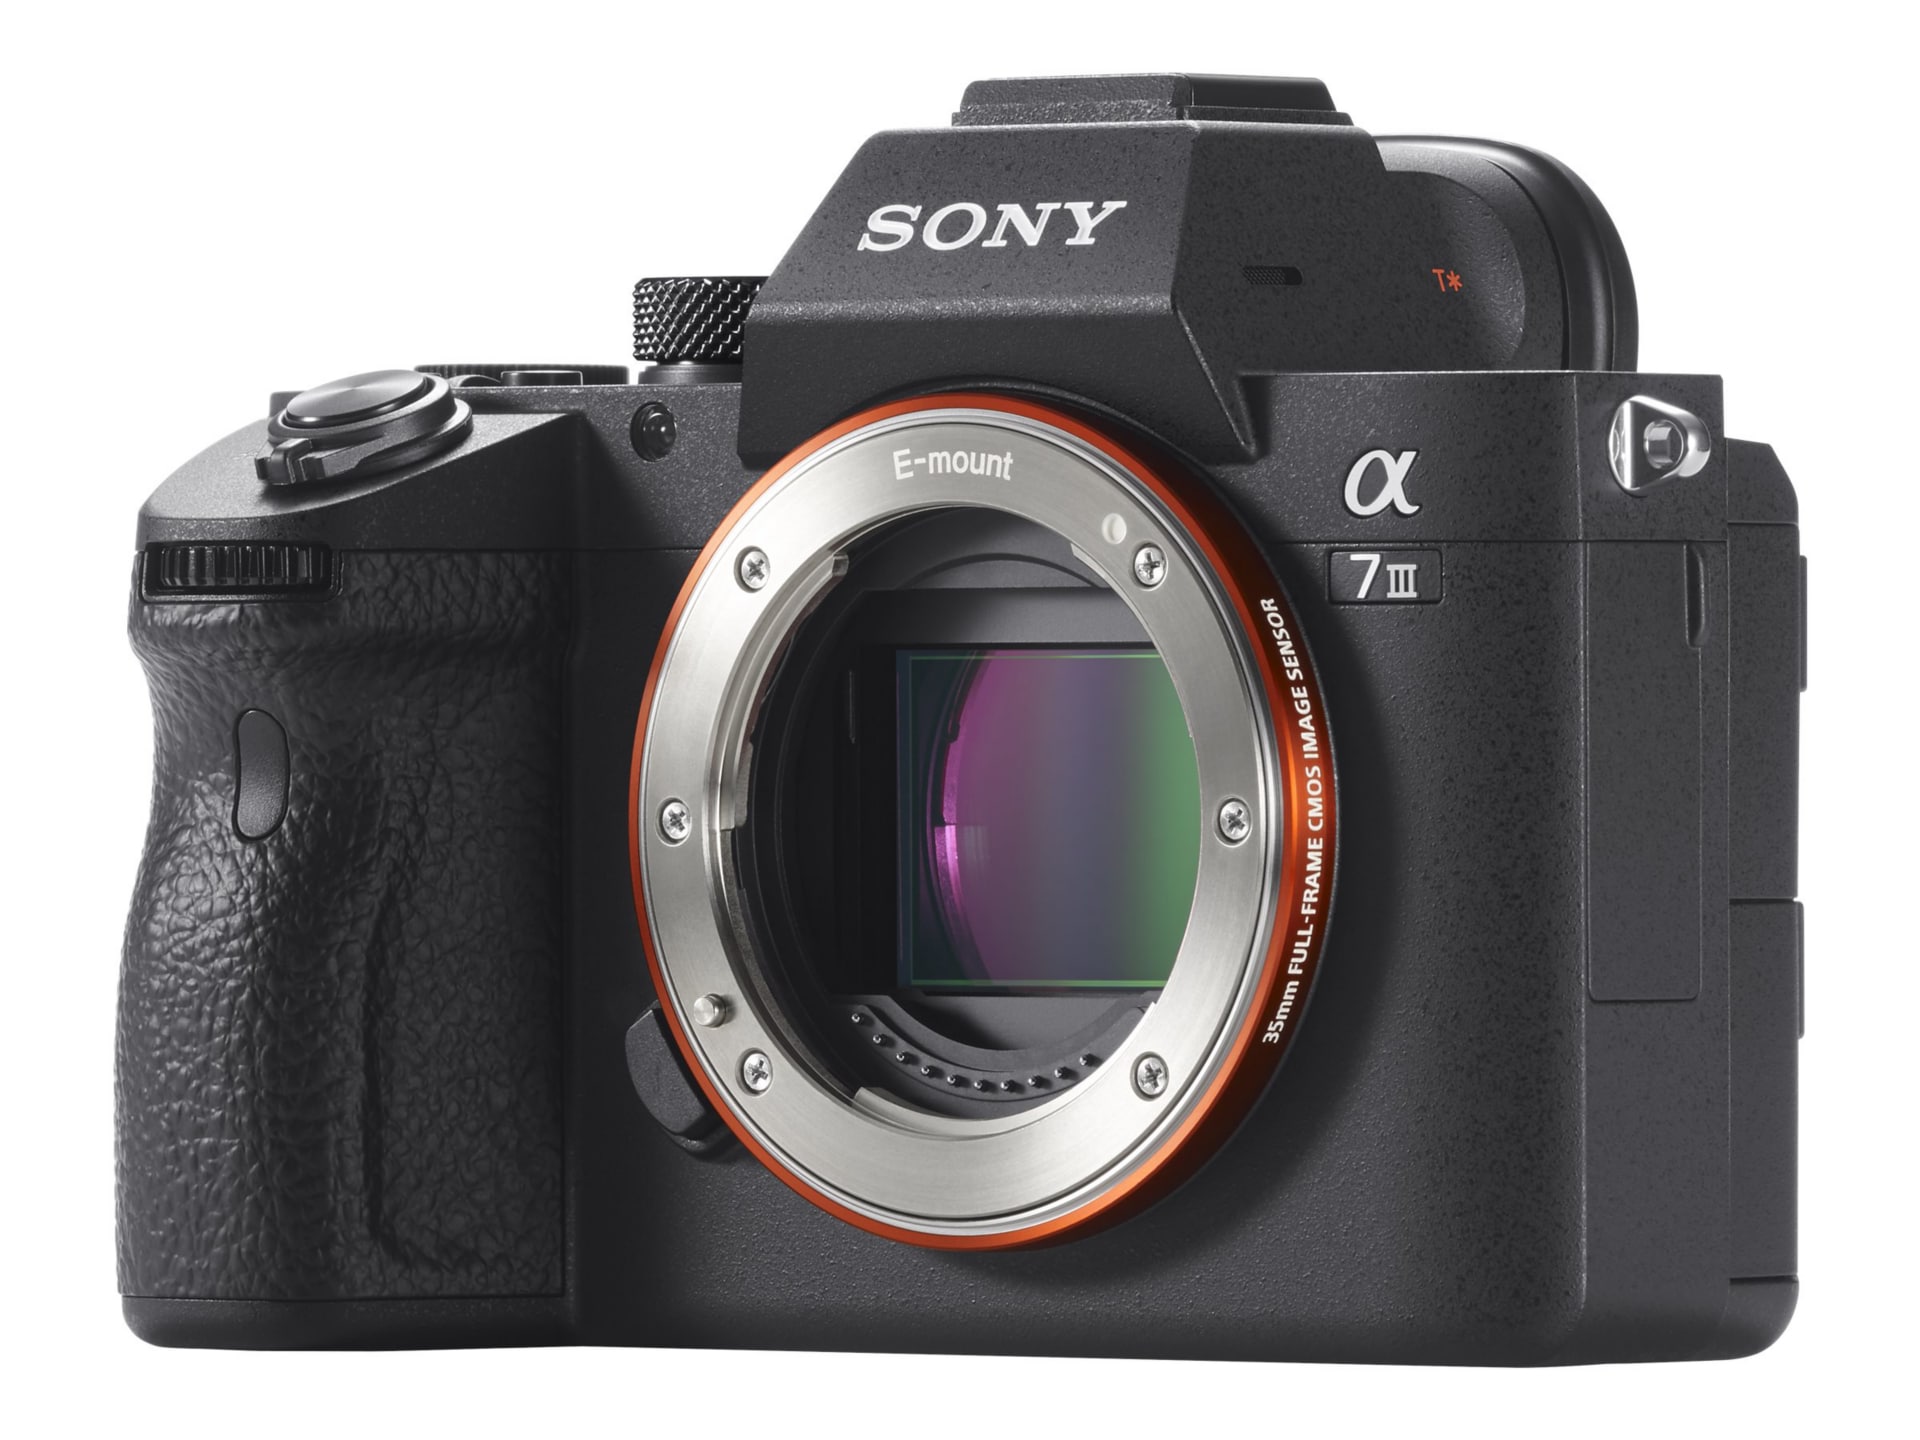 Buy Sony Alpha Ilce-7Sm3 Full-Frame Mirrorless Optical Zoom Camera